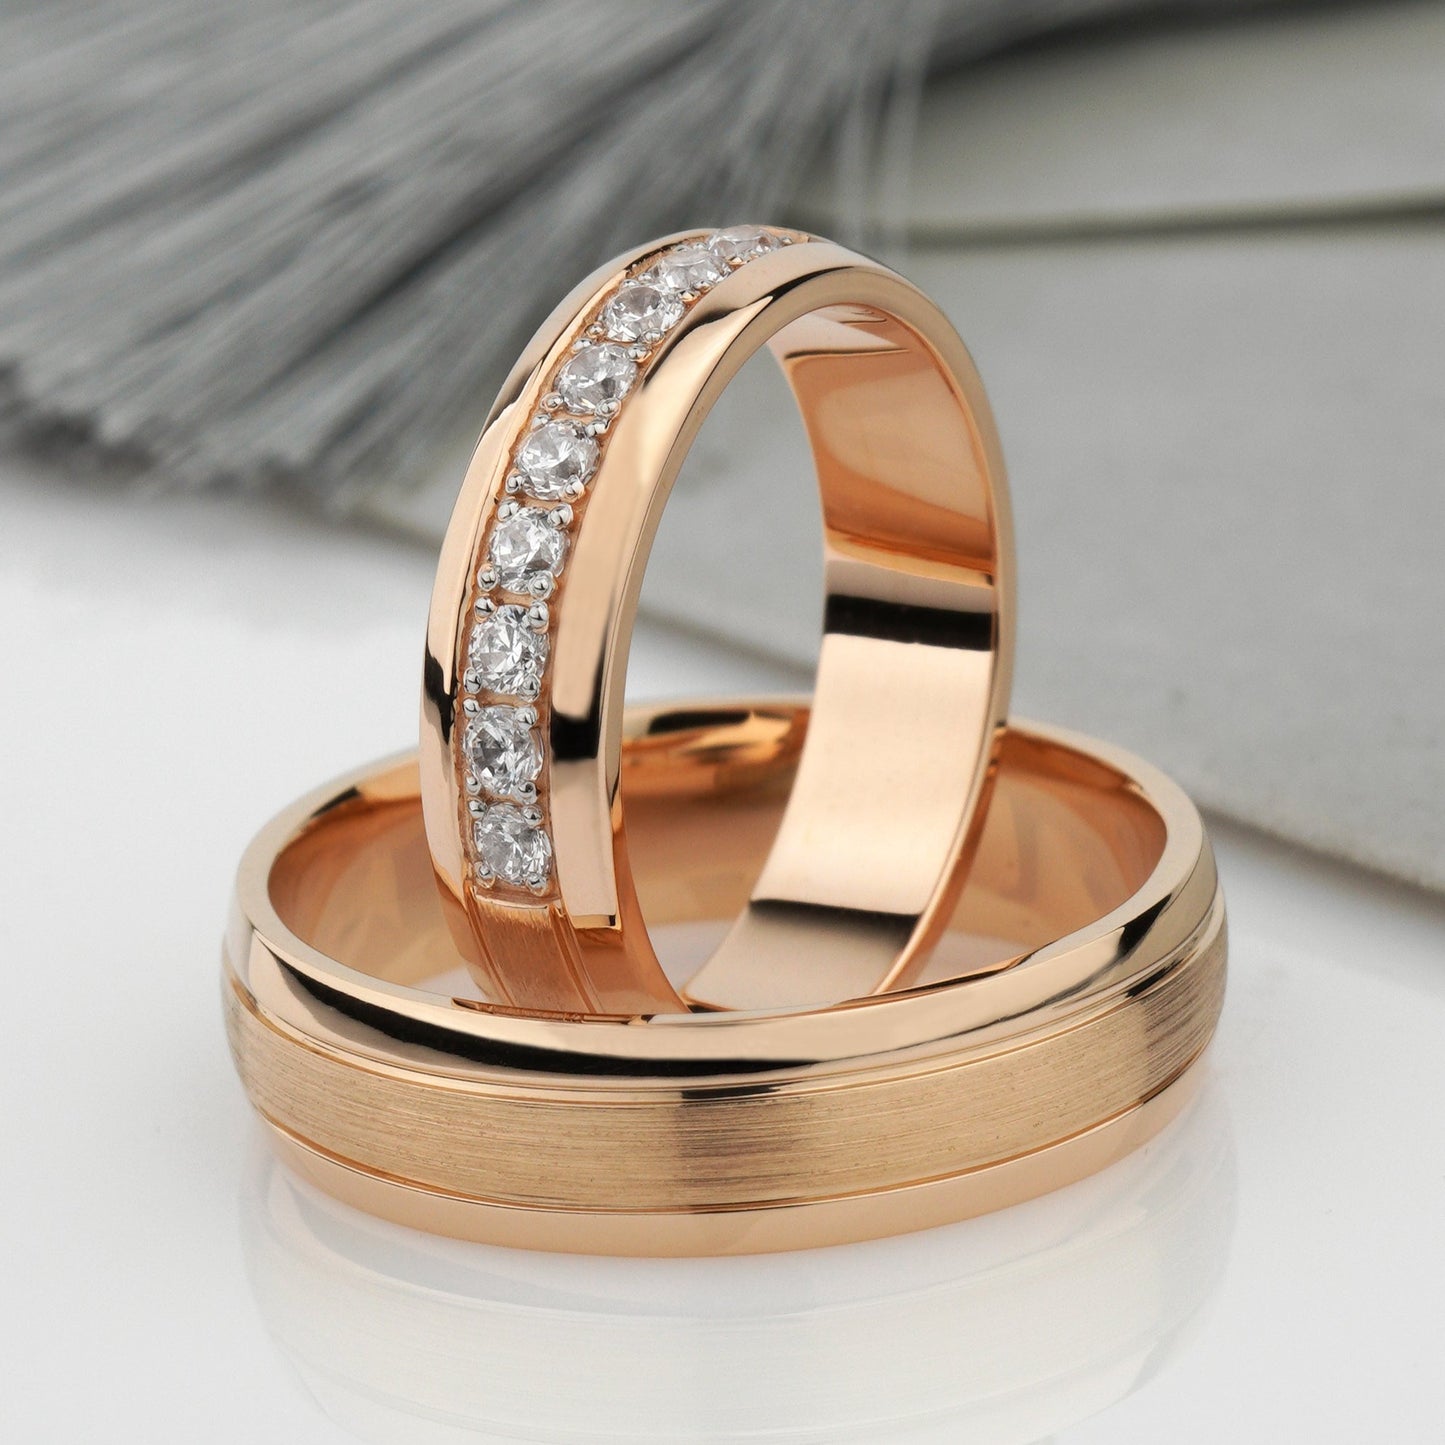 Wedding bands set his and hers. Couples wedding bands. Diamond wedding band. Unique matching wedding bands. His and hers wedding bands. Diamond wedding rings. Classic wedding rings set. Unique wedding bands.Rose gold wedding ring set